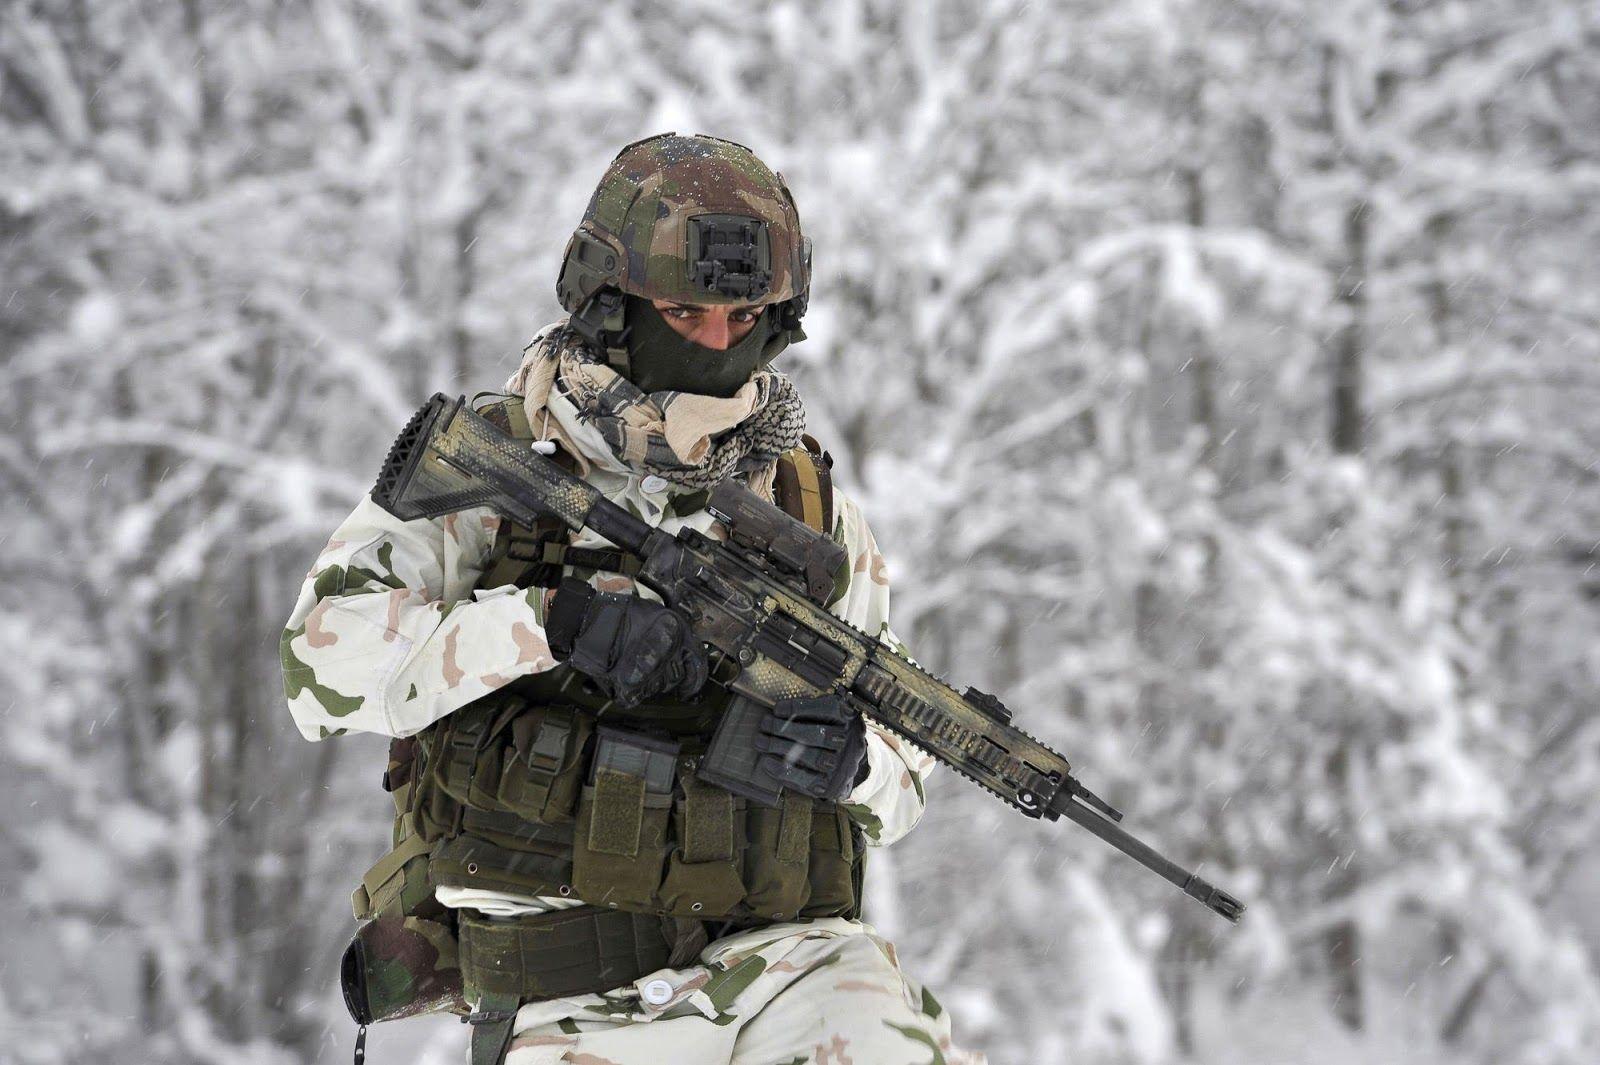 French Army Sniper in the snow